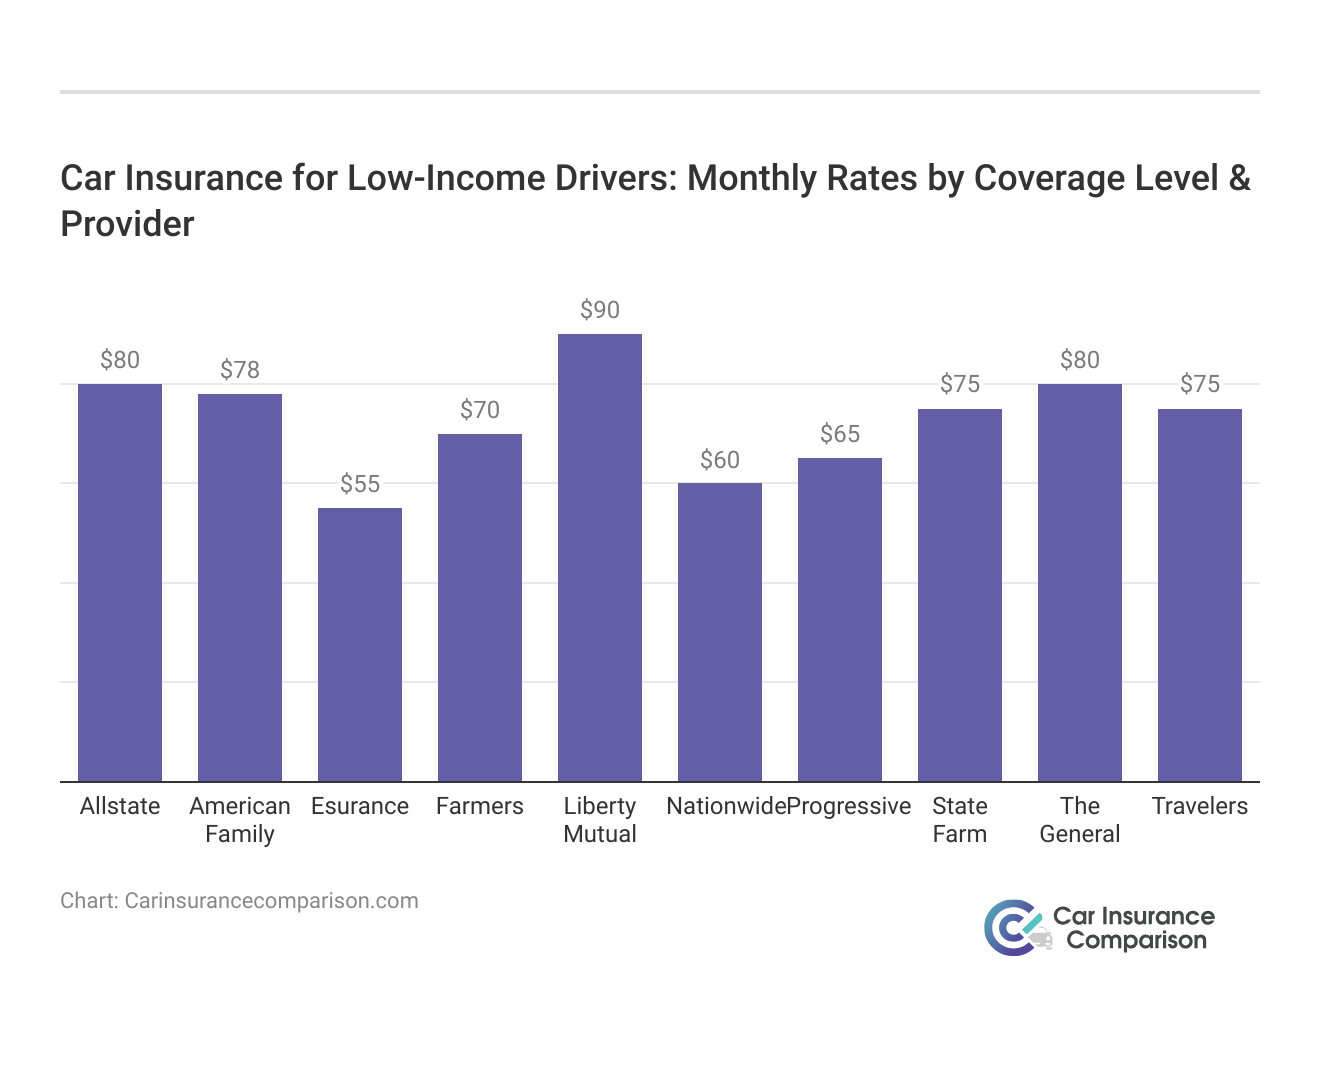 <h3>Car Insurance for Low-Income Drivers: Monthly Rates by Coverage Level & Provider</h3>